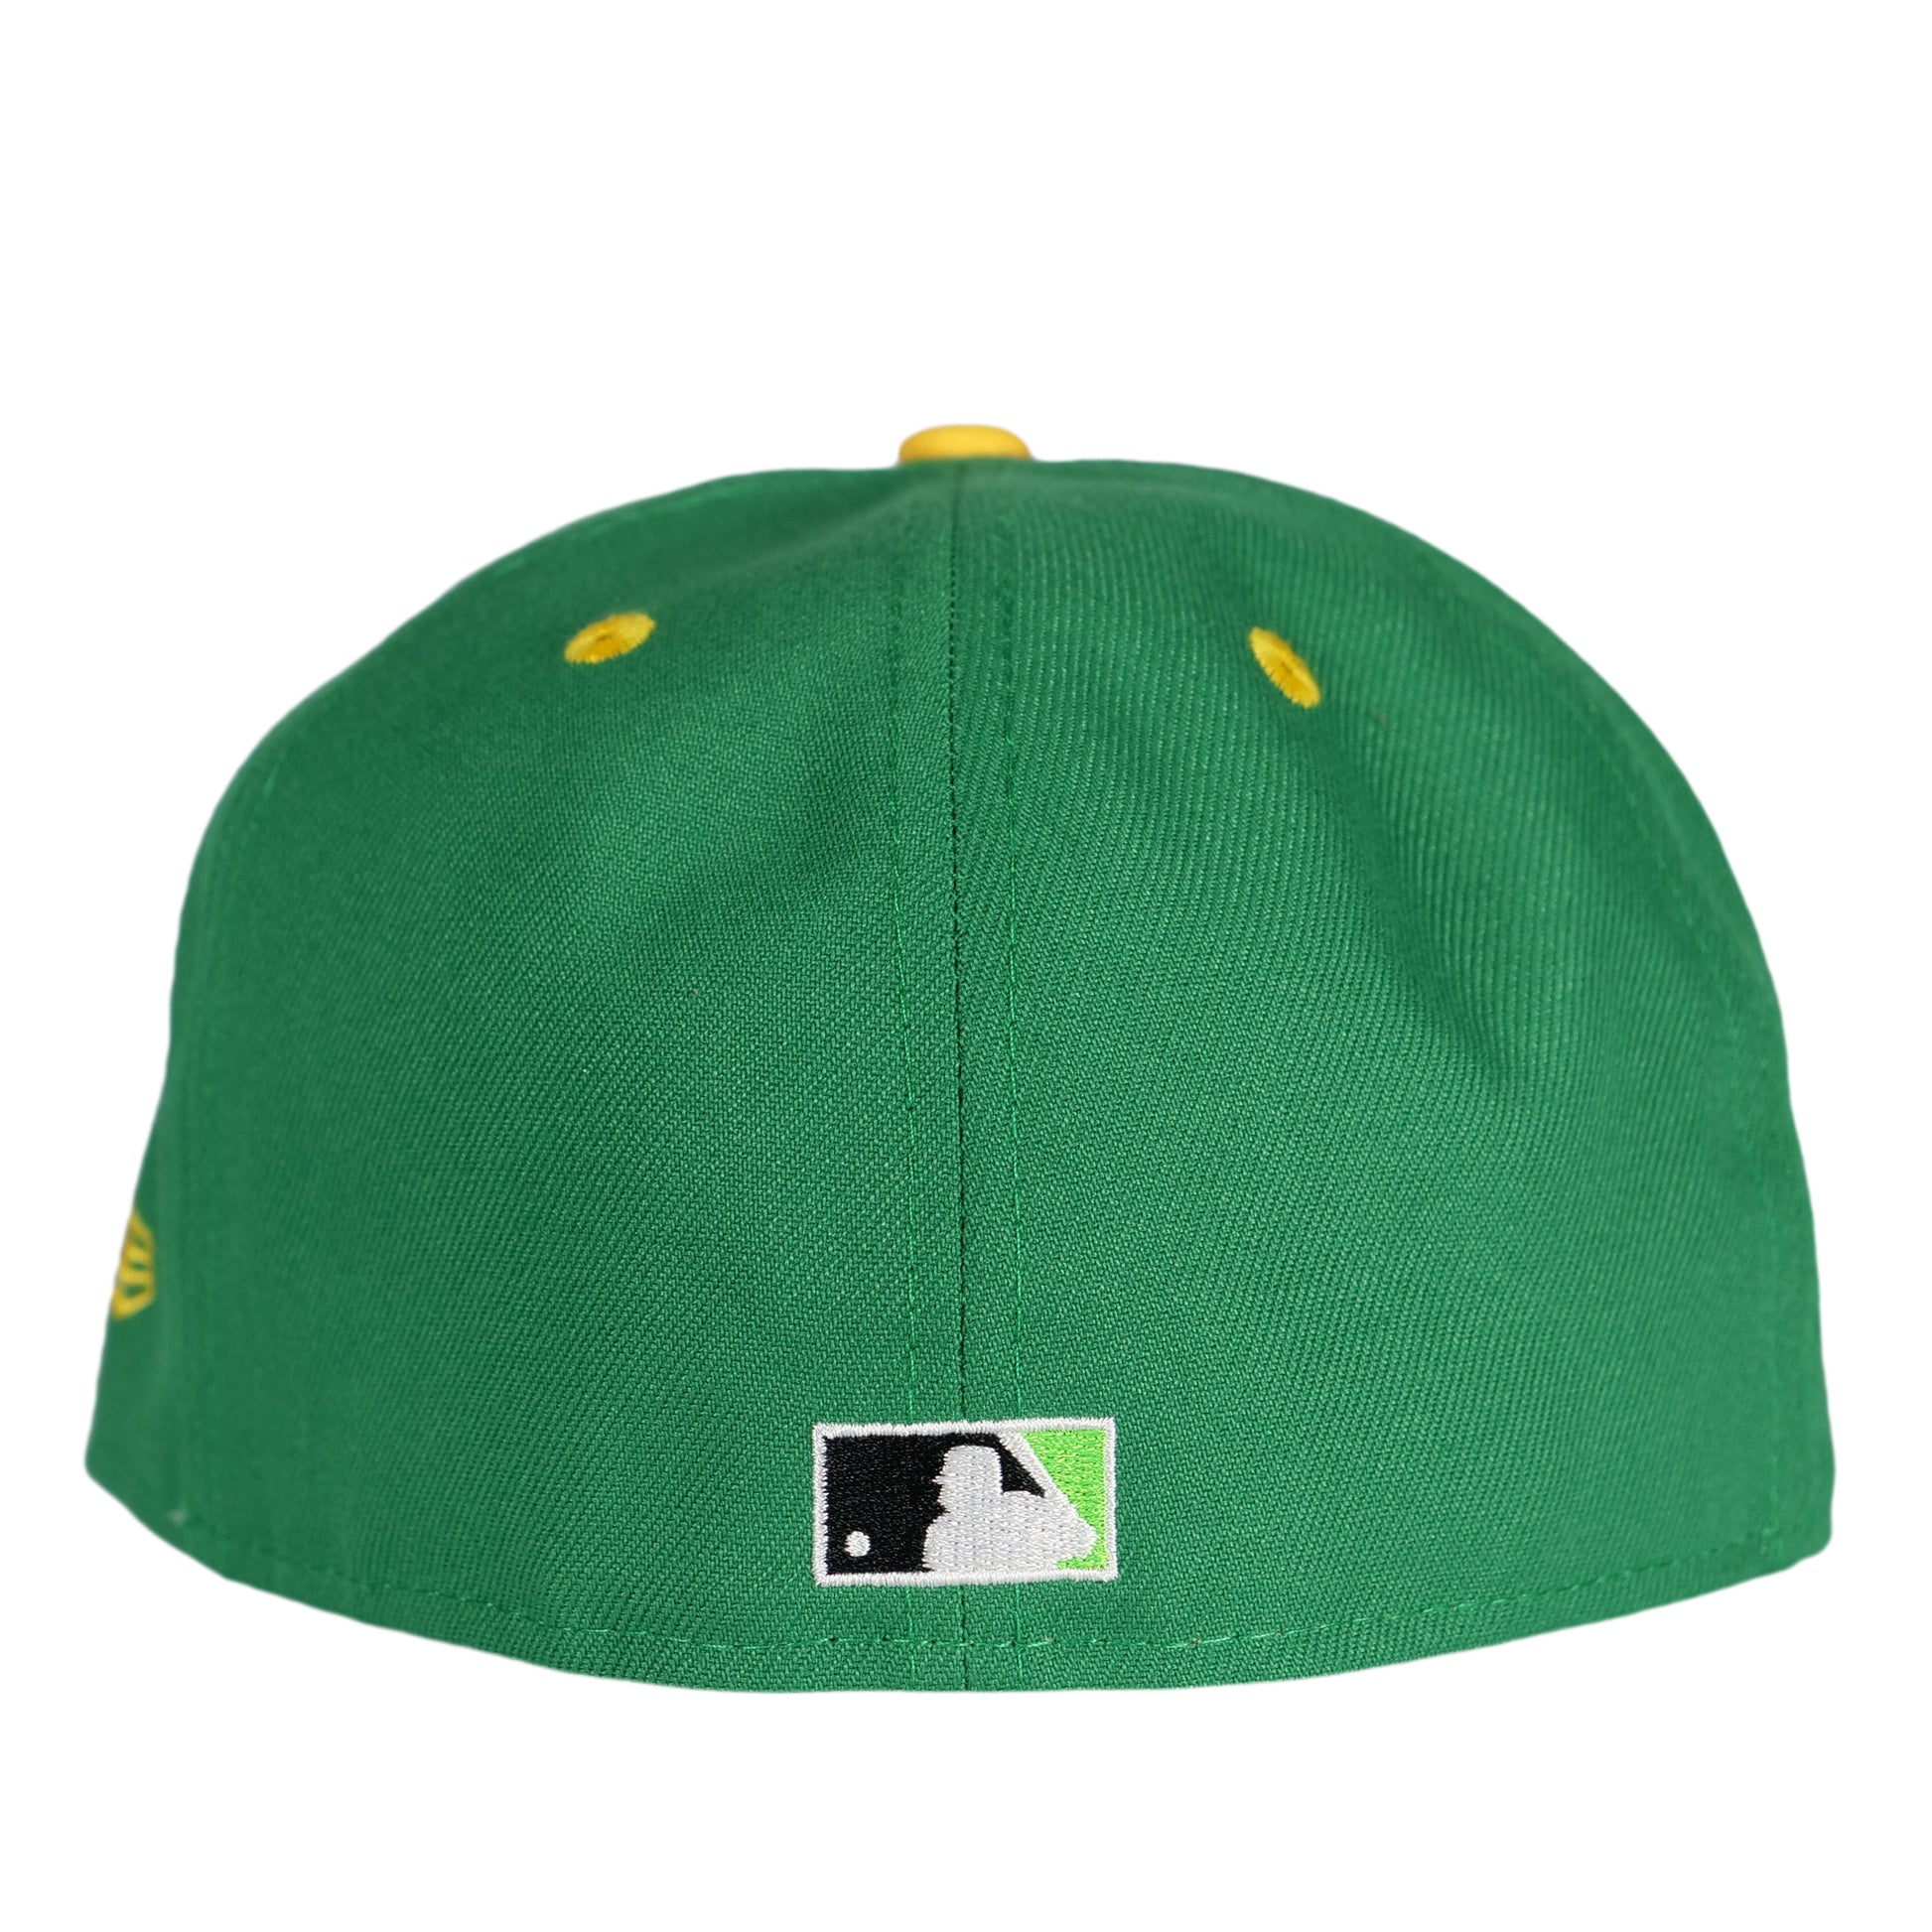 New Era 59FIFTY Colorado Rockies Fitted Hat Dark Green White